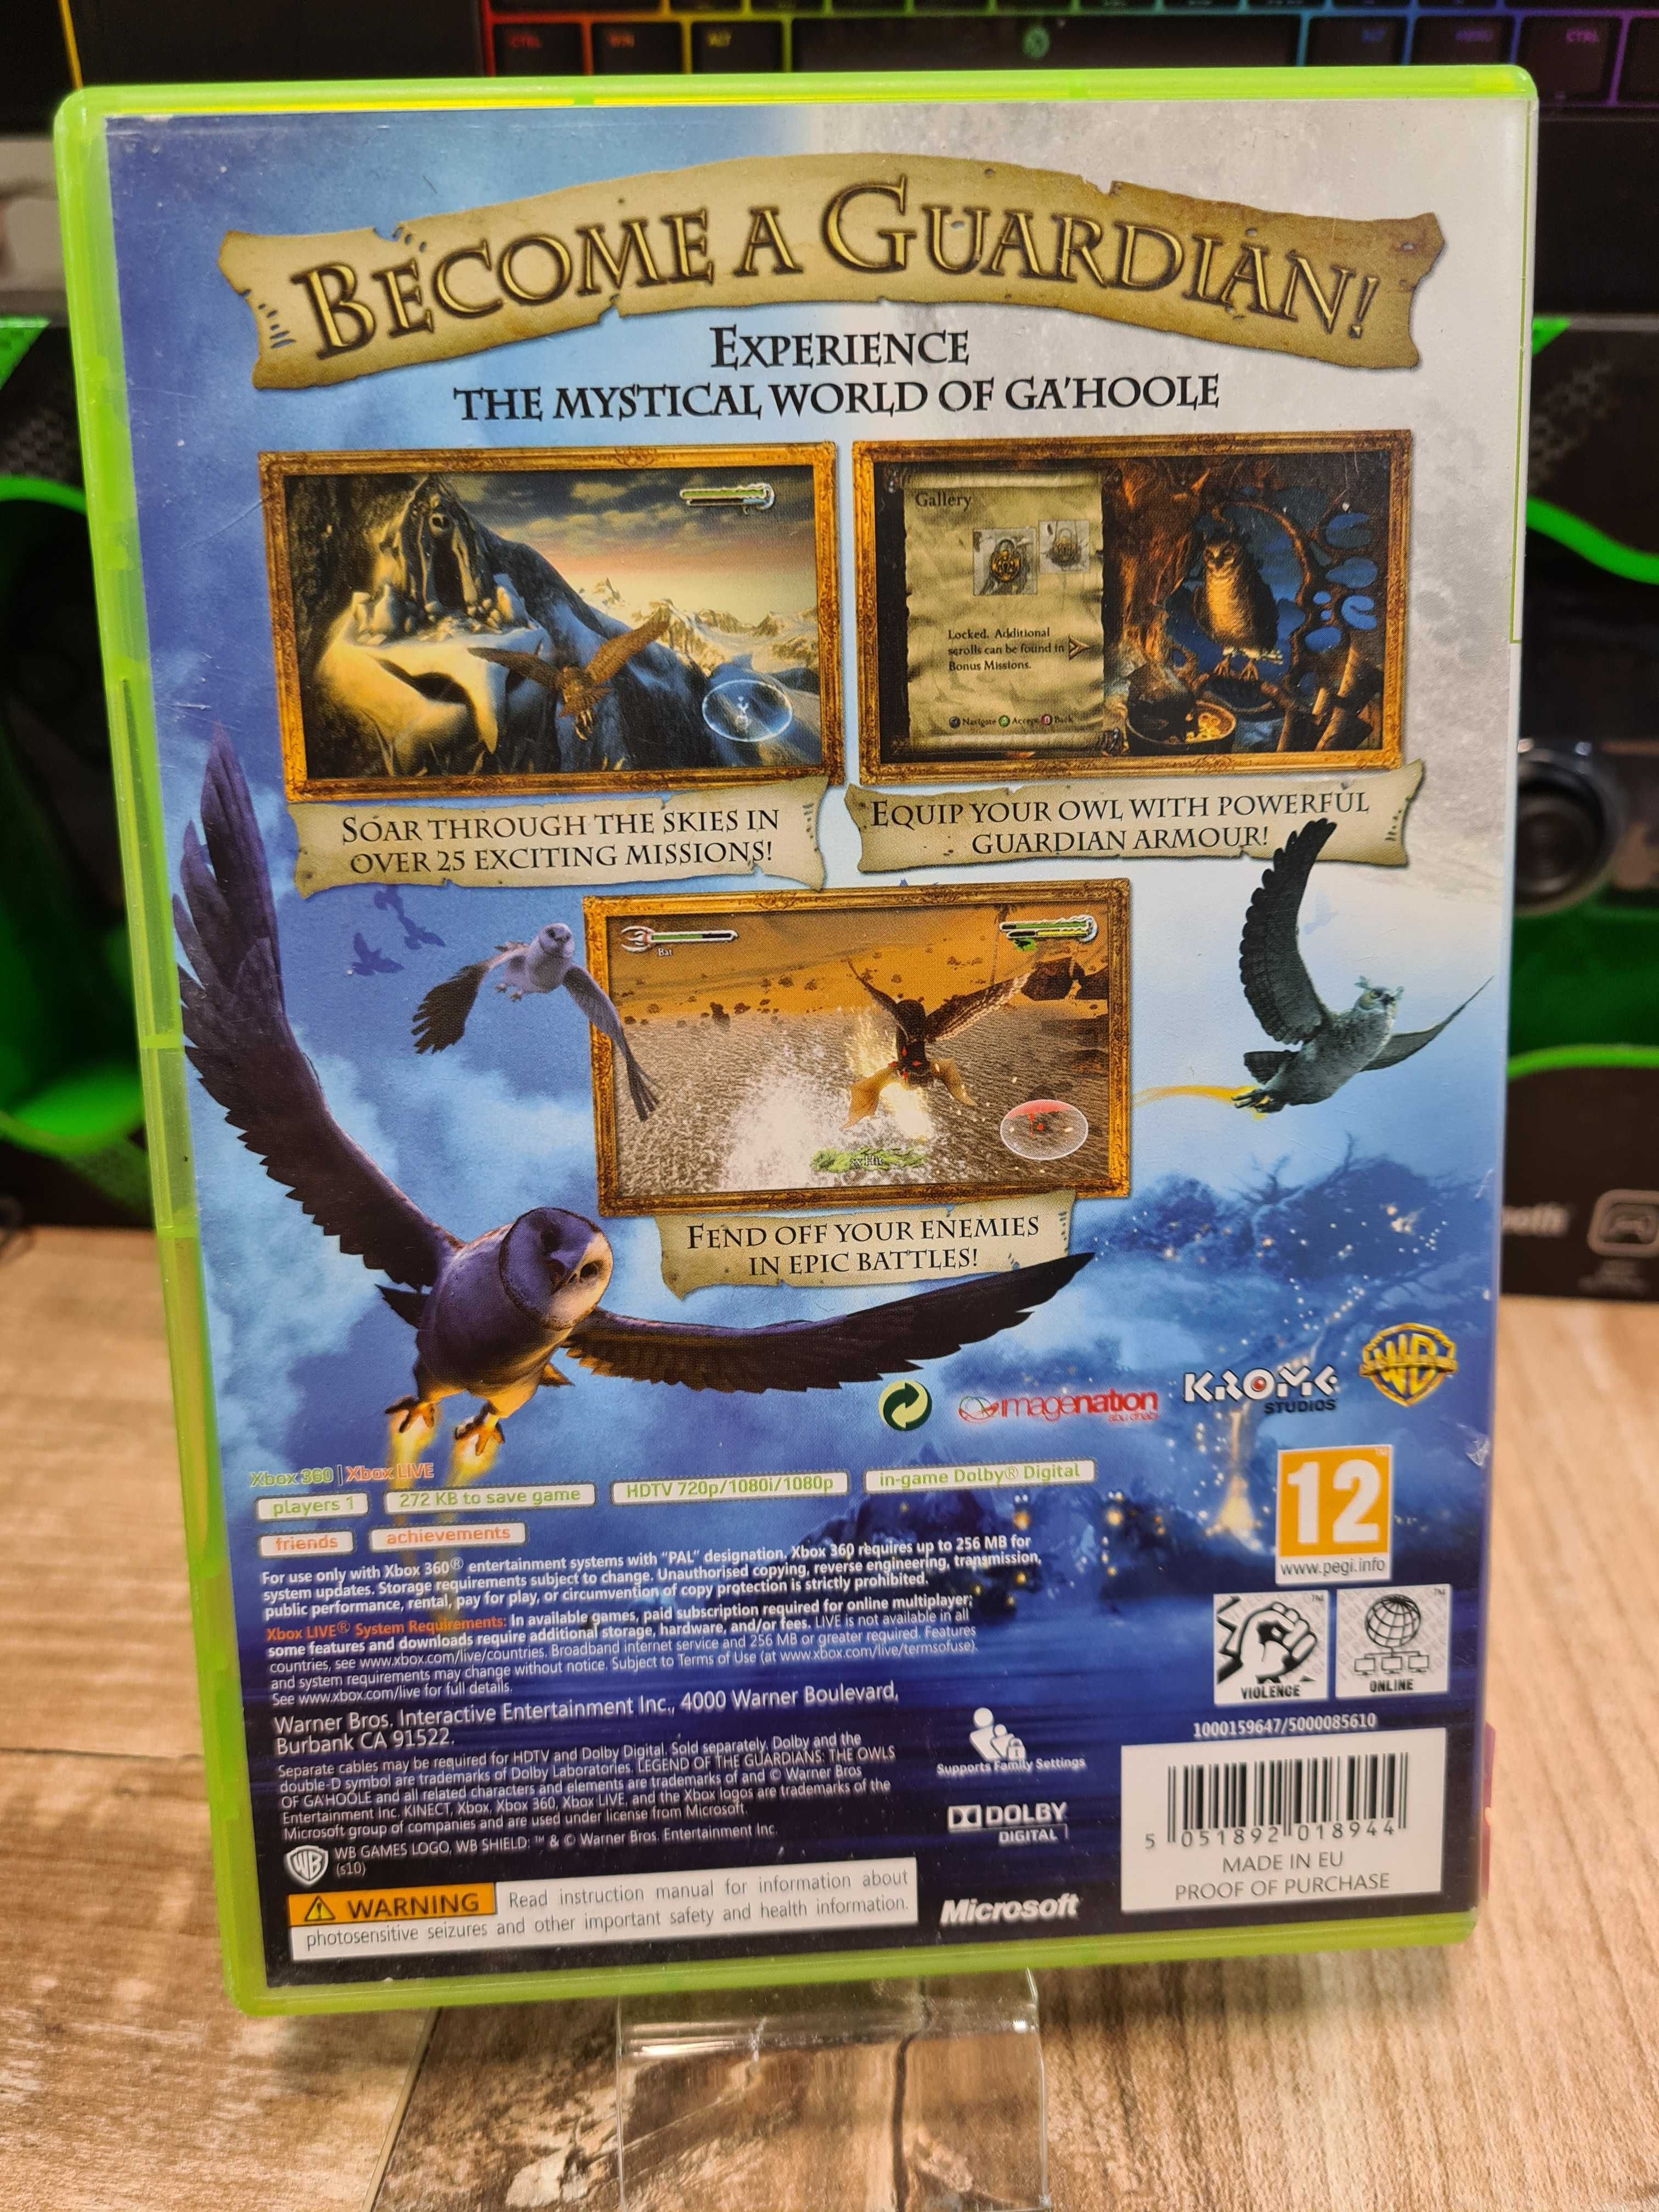 Legend of the Guardians: The Owls of Ga'Hoole XBOX 360